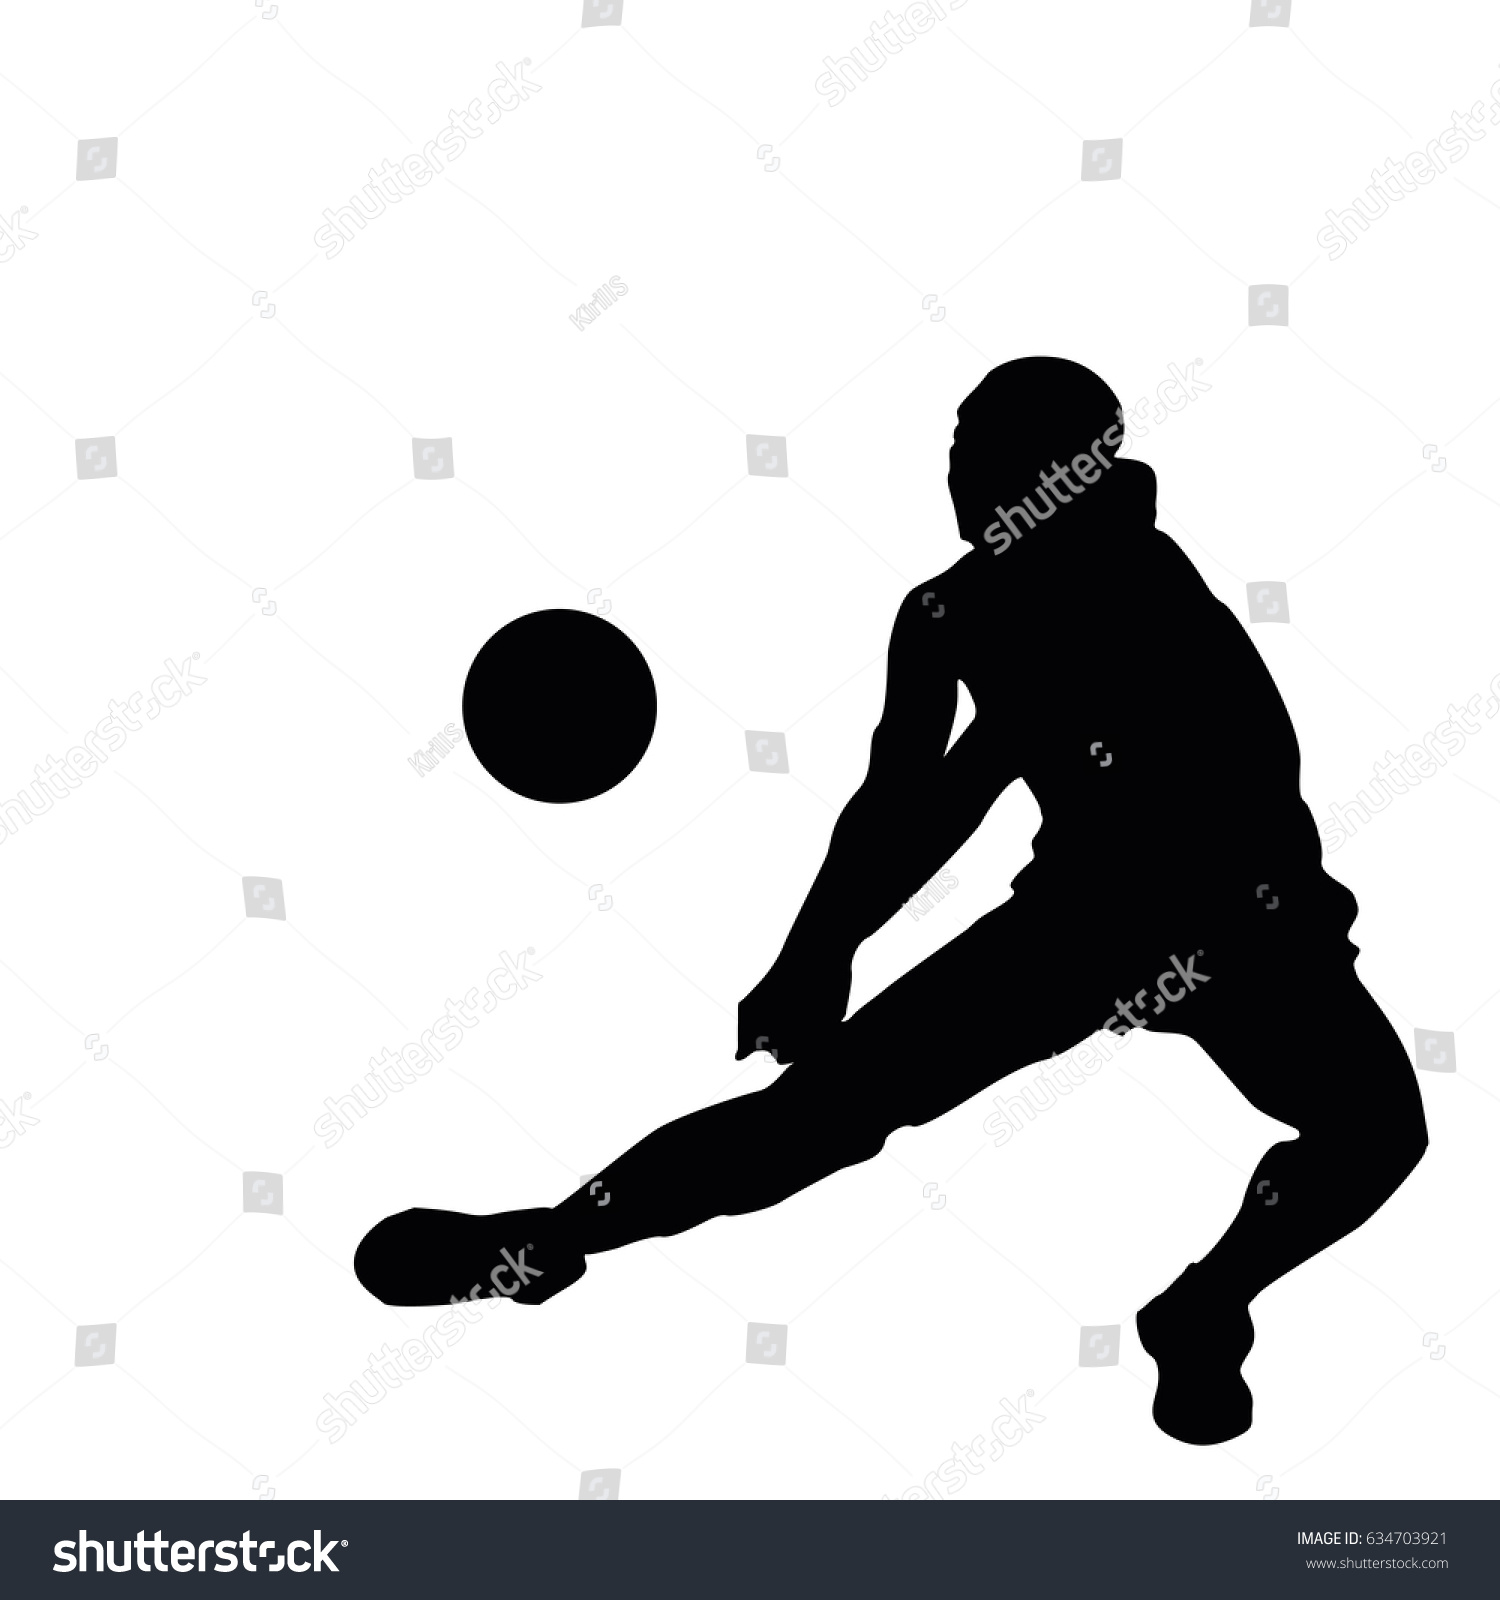 Download Illustration Abstract Volleyball Player Silhouette Stock ...